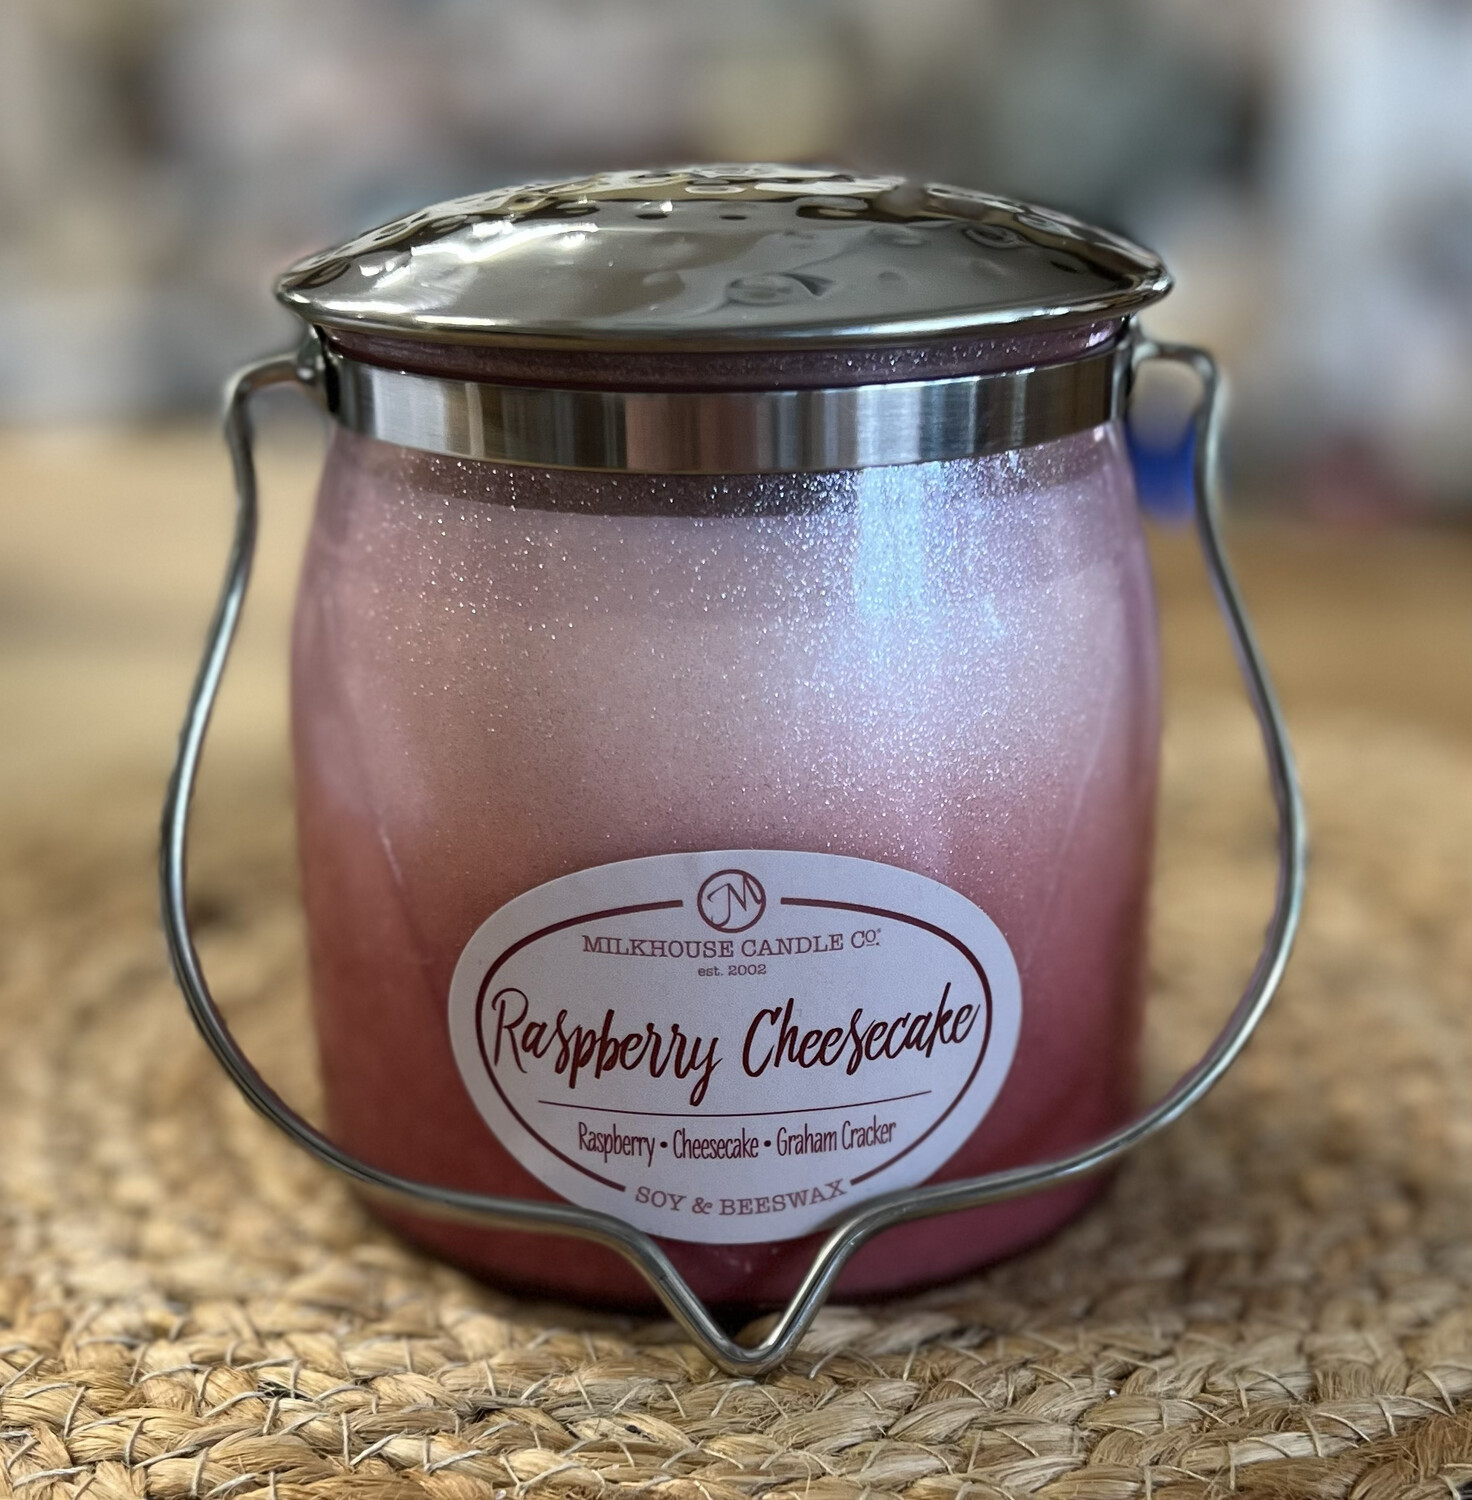 Limited Edition Raspberry Cheesecake 16oz Butter Jar